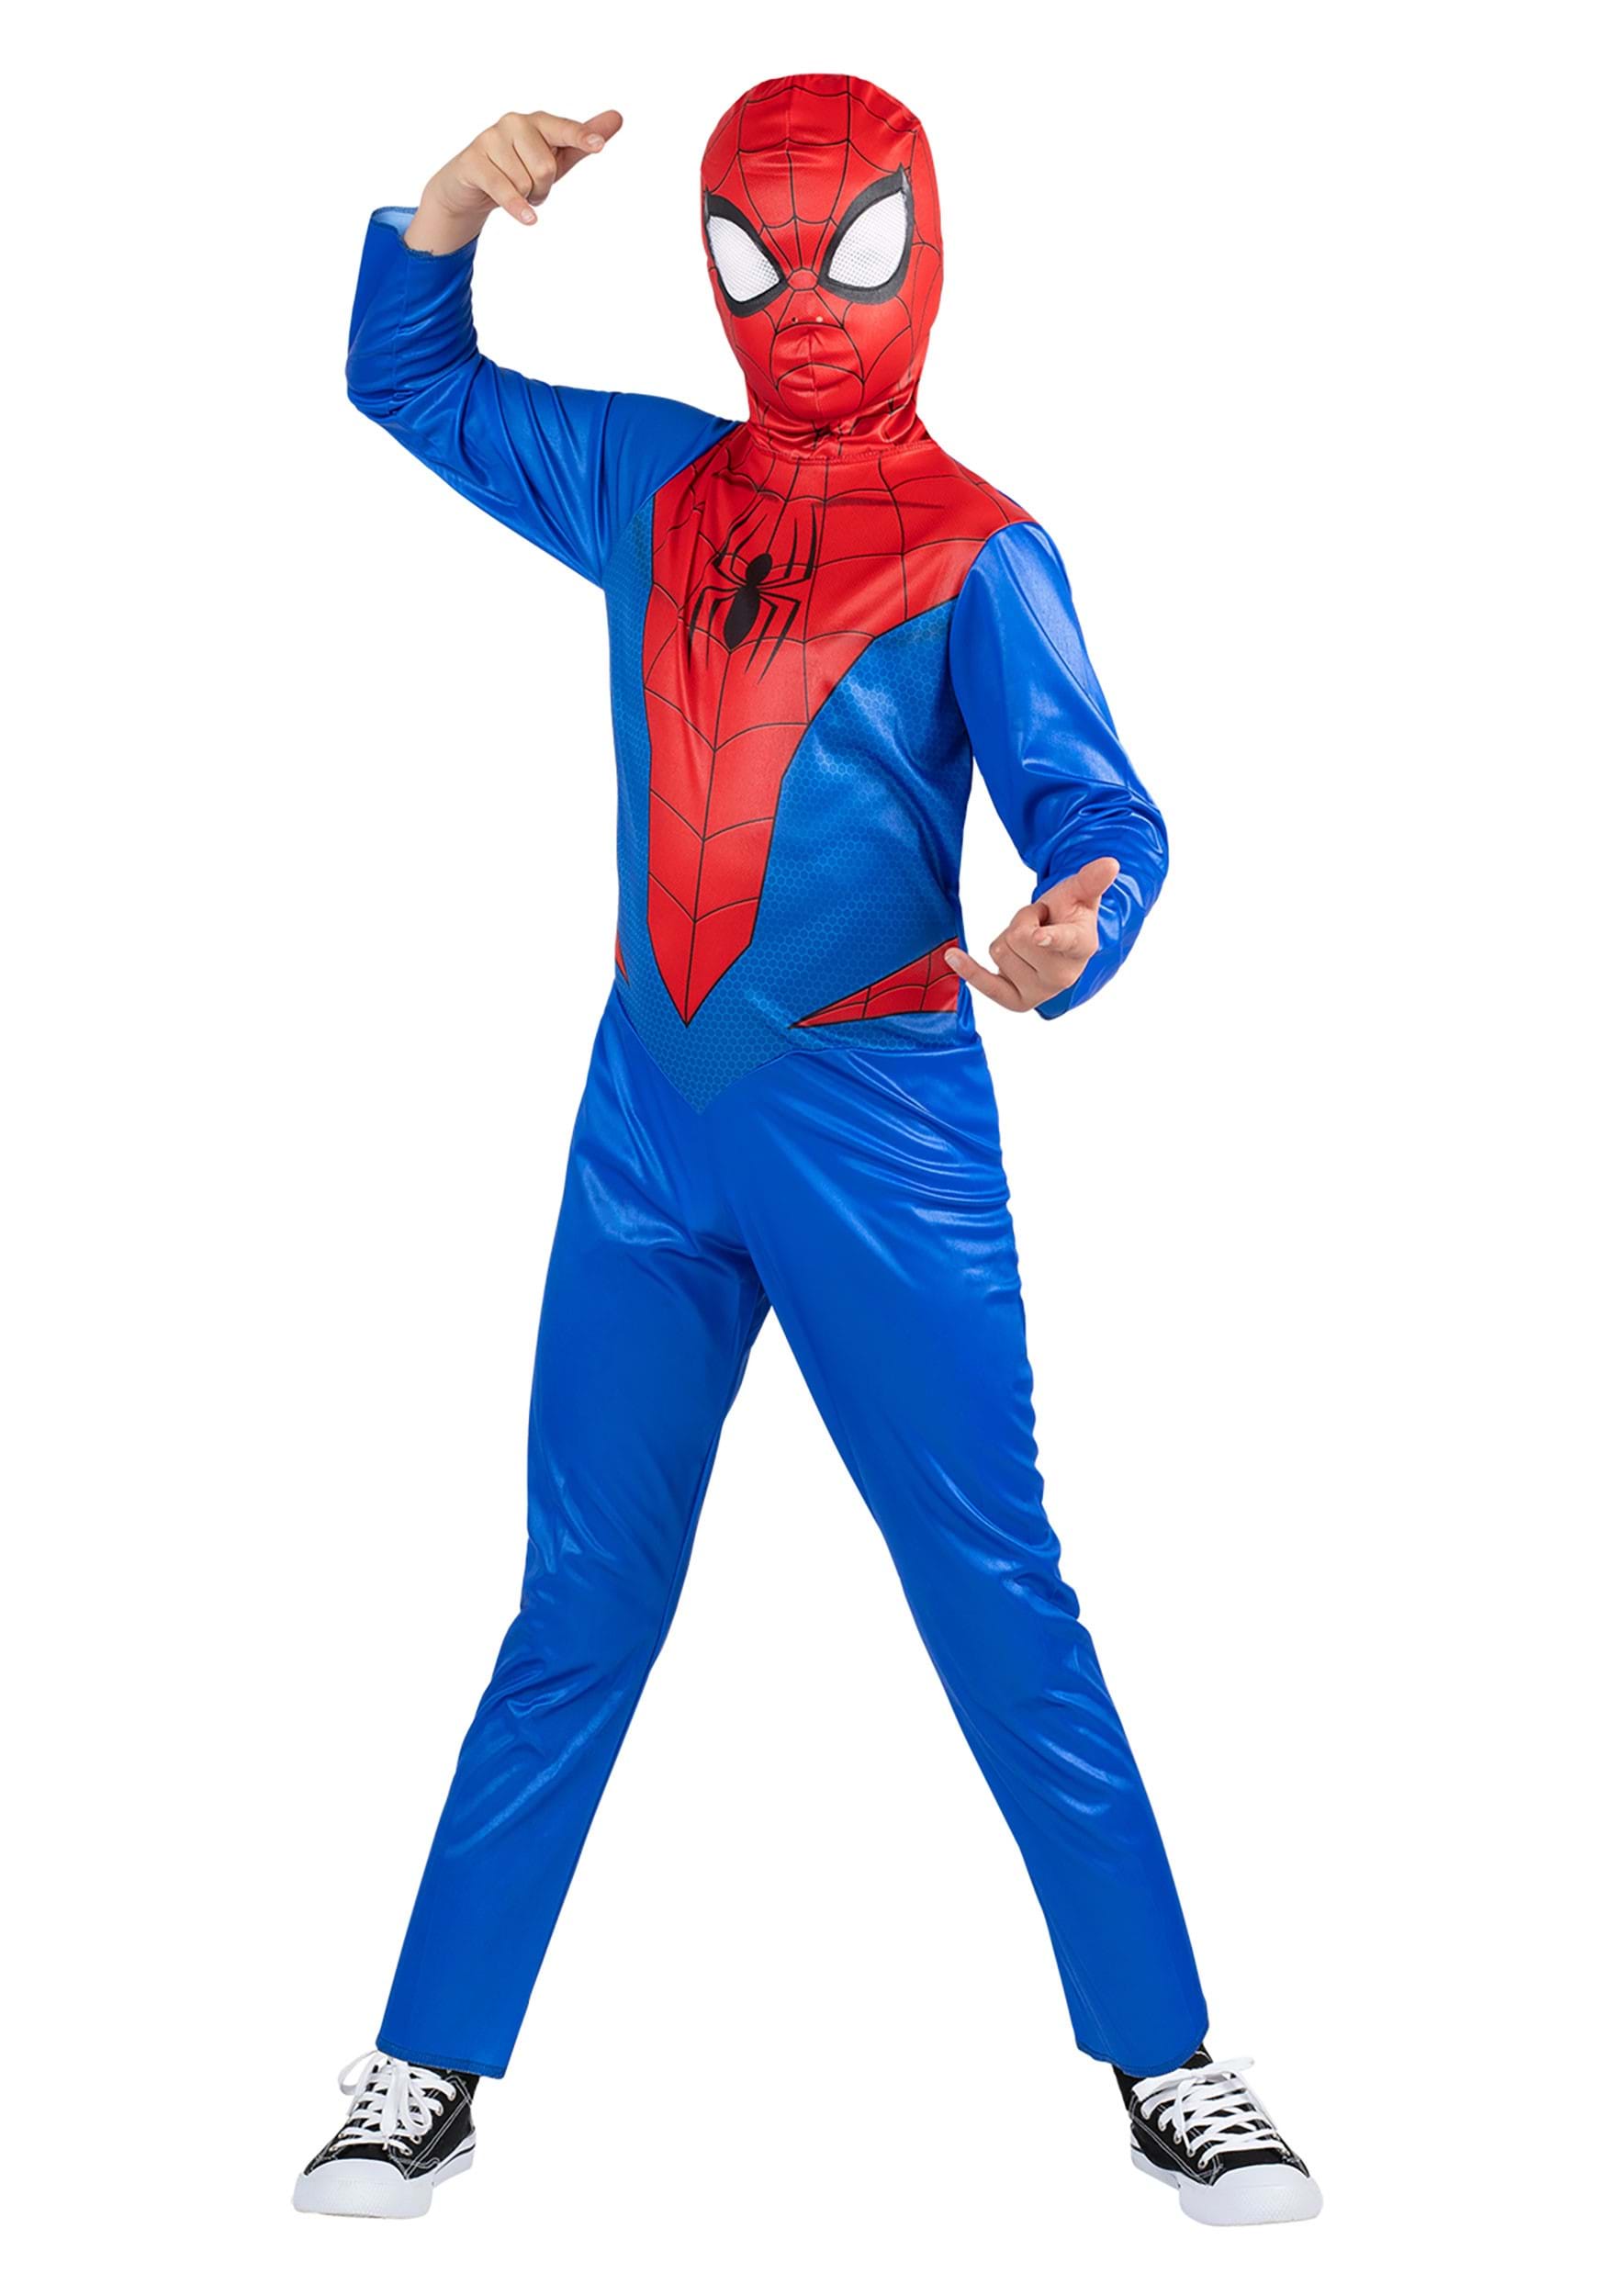 Spider Man: Homecoming Costume - Movie Replica - Marvel Official